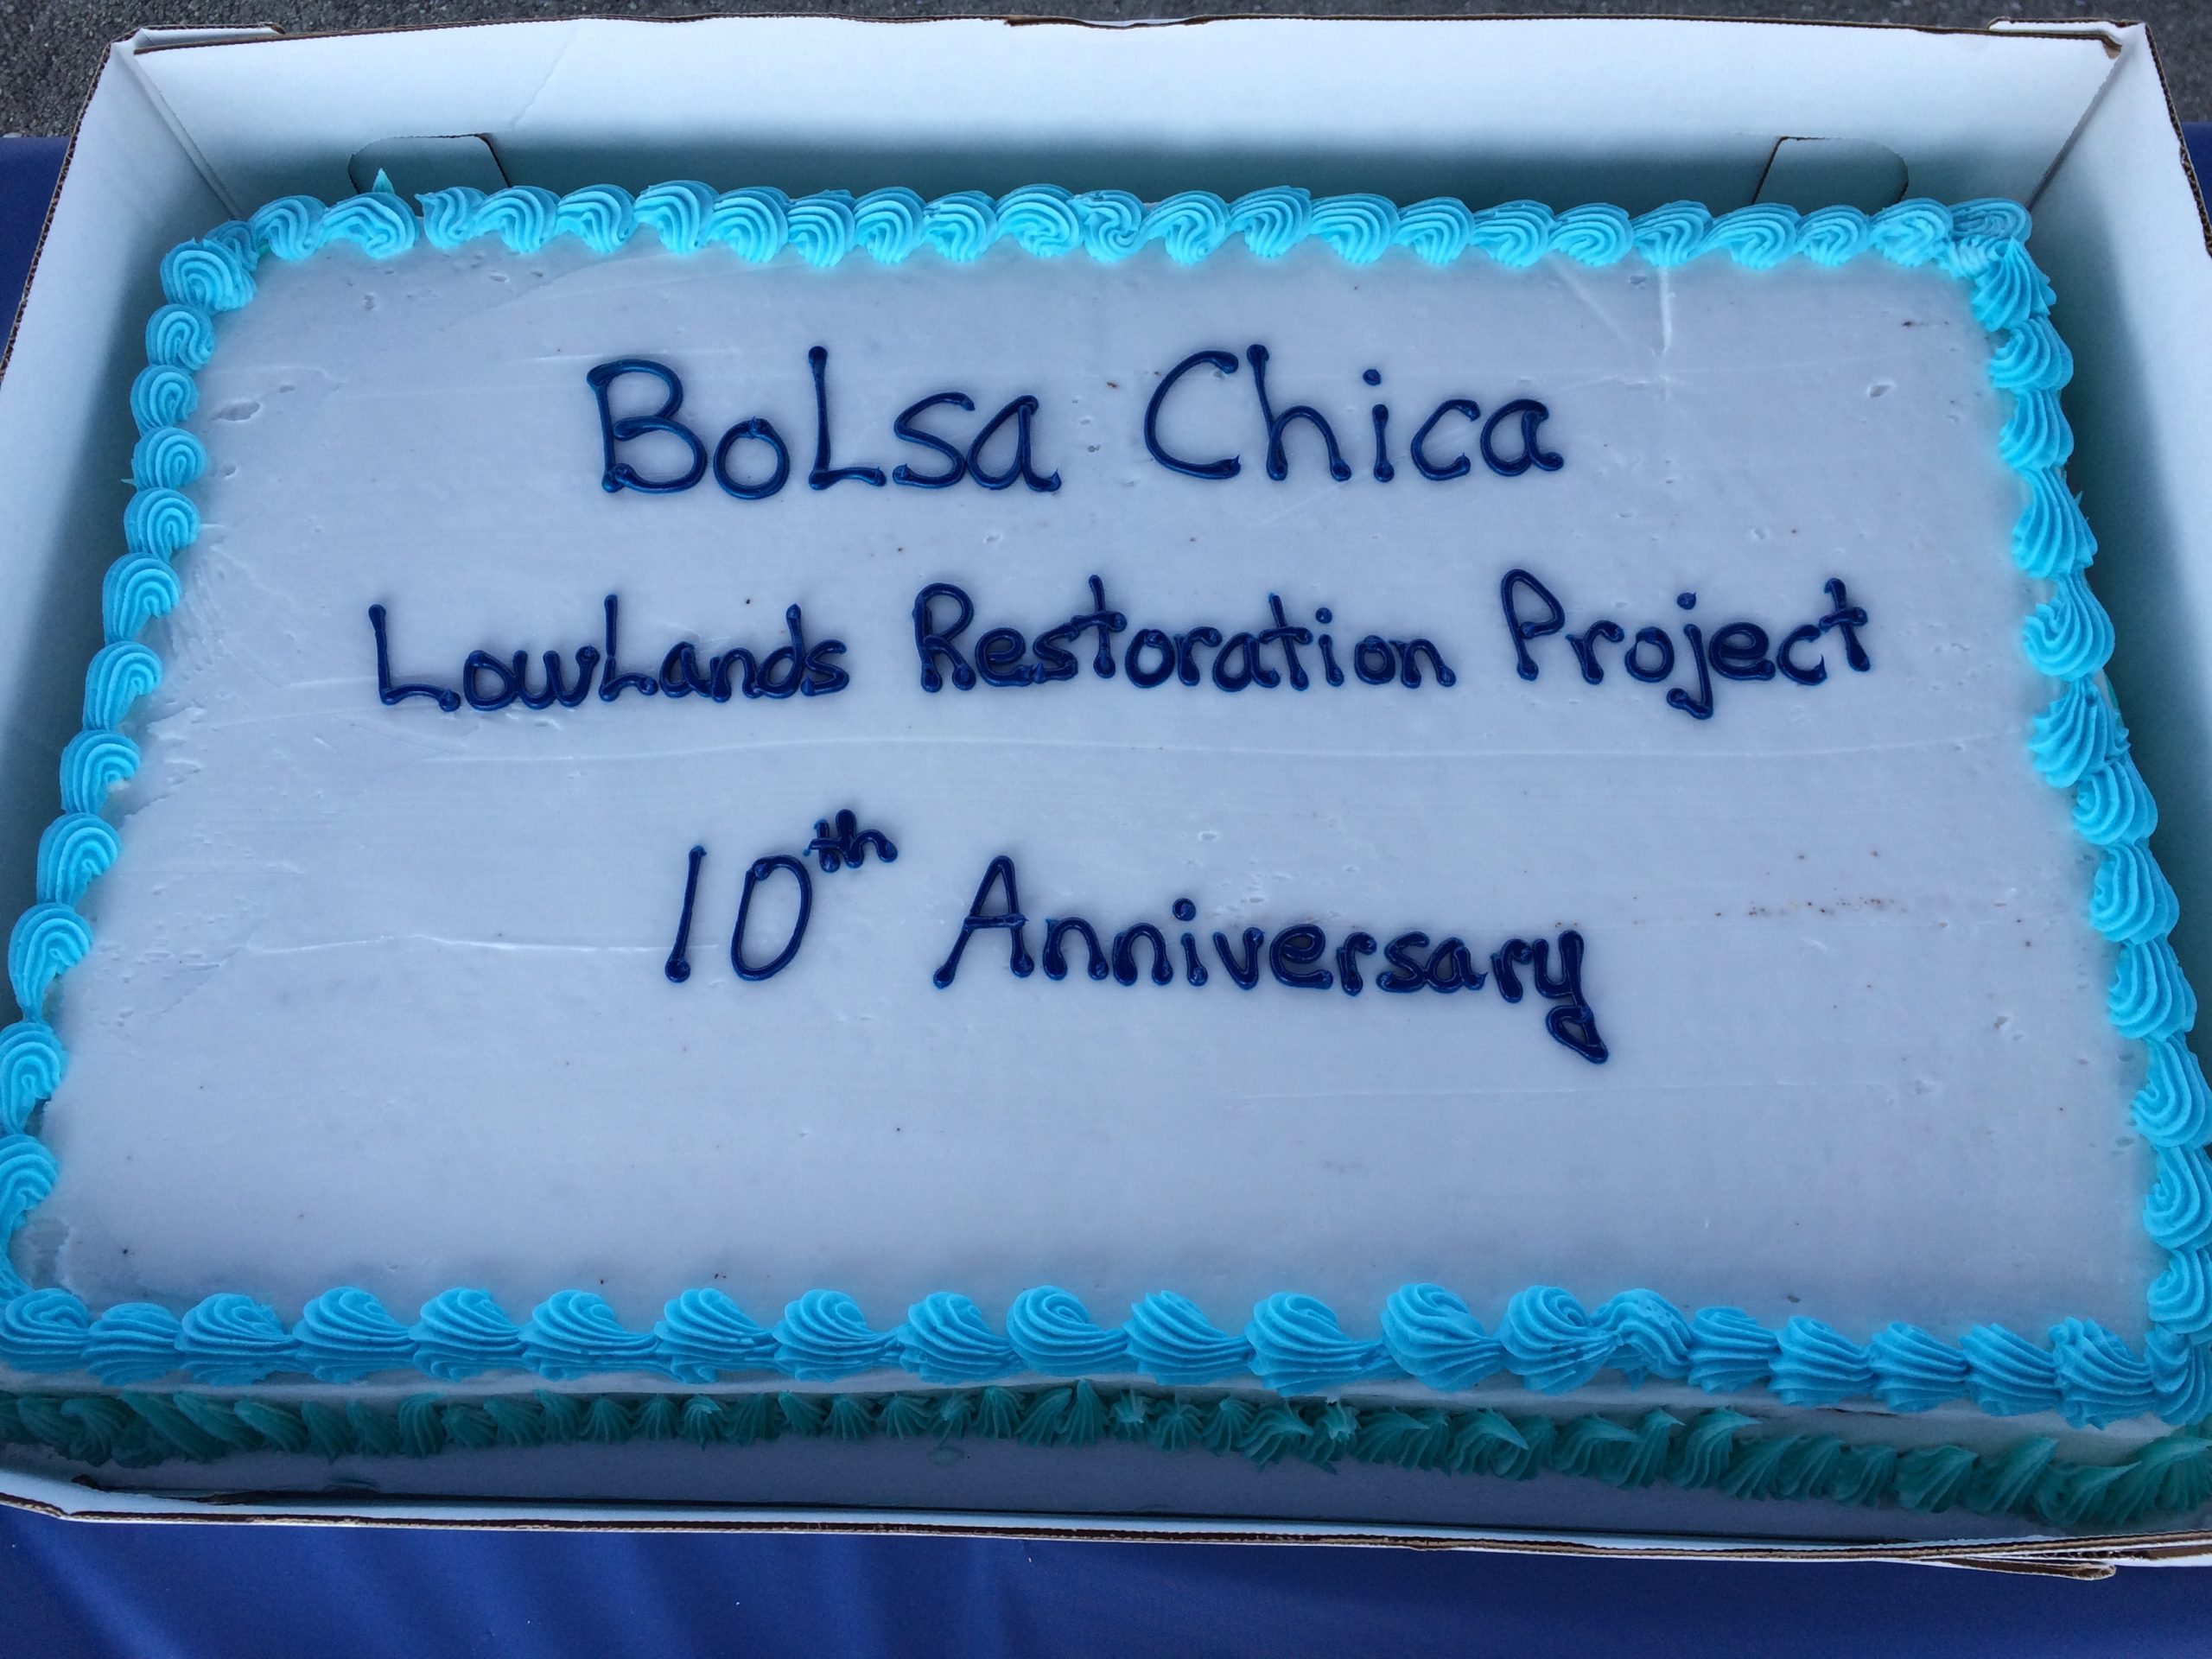 Cake celebrating the 10th anniversary of the Bolsa Chica Lowlands Restoration Project.